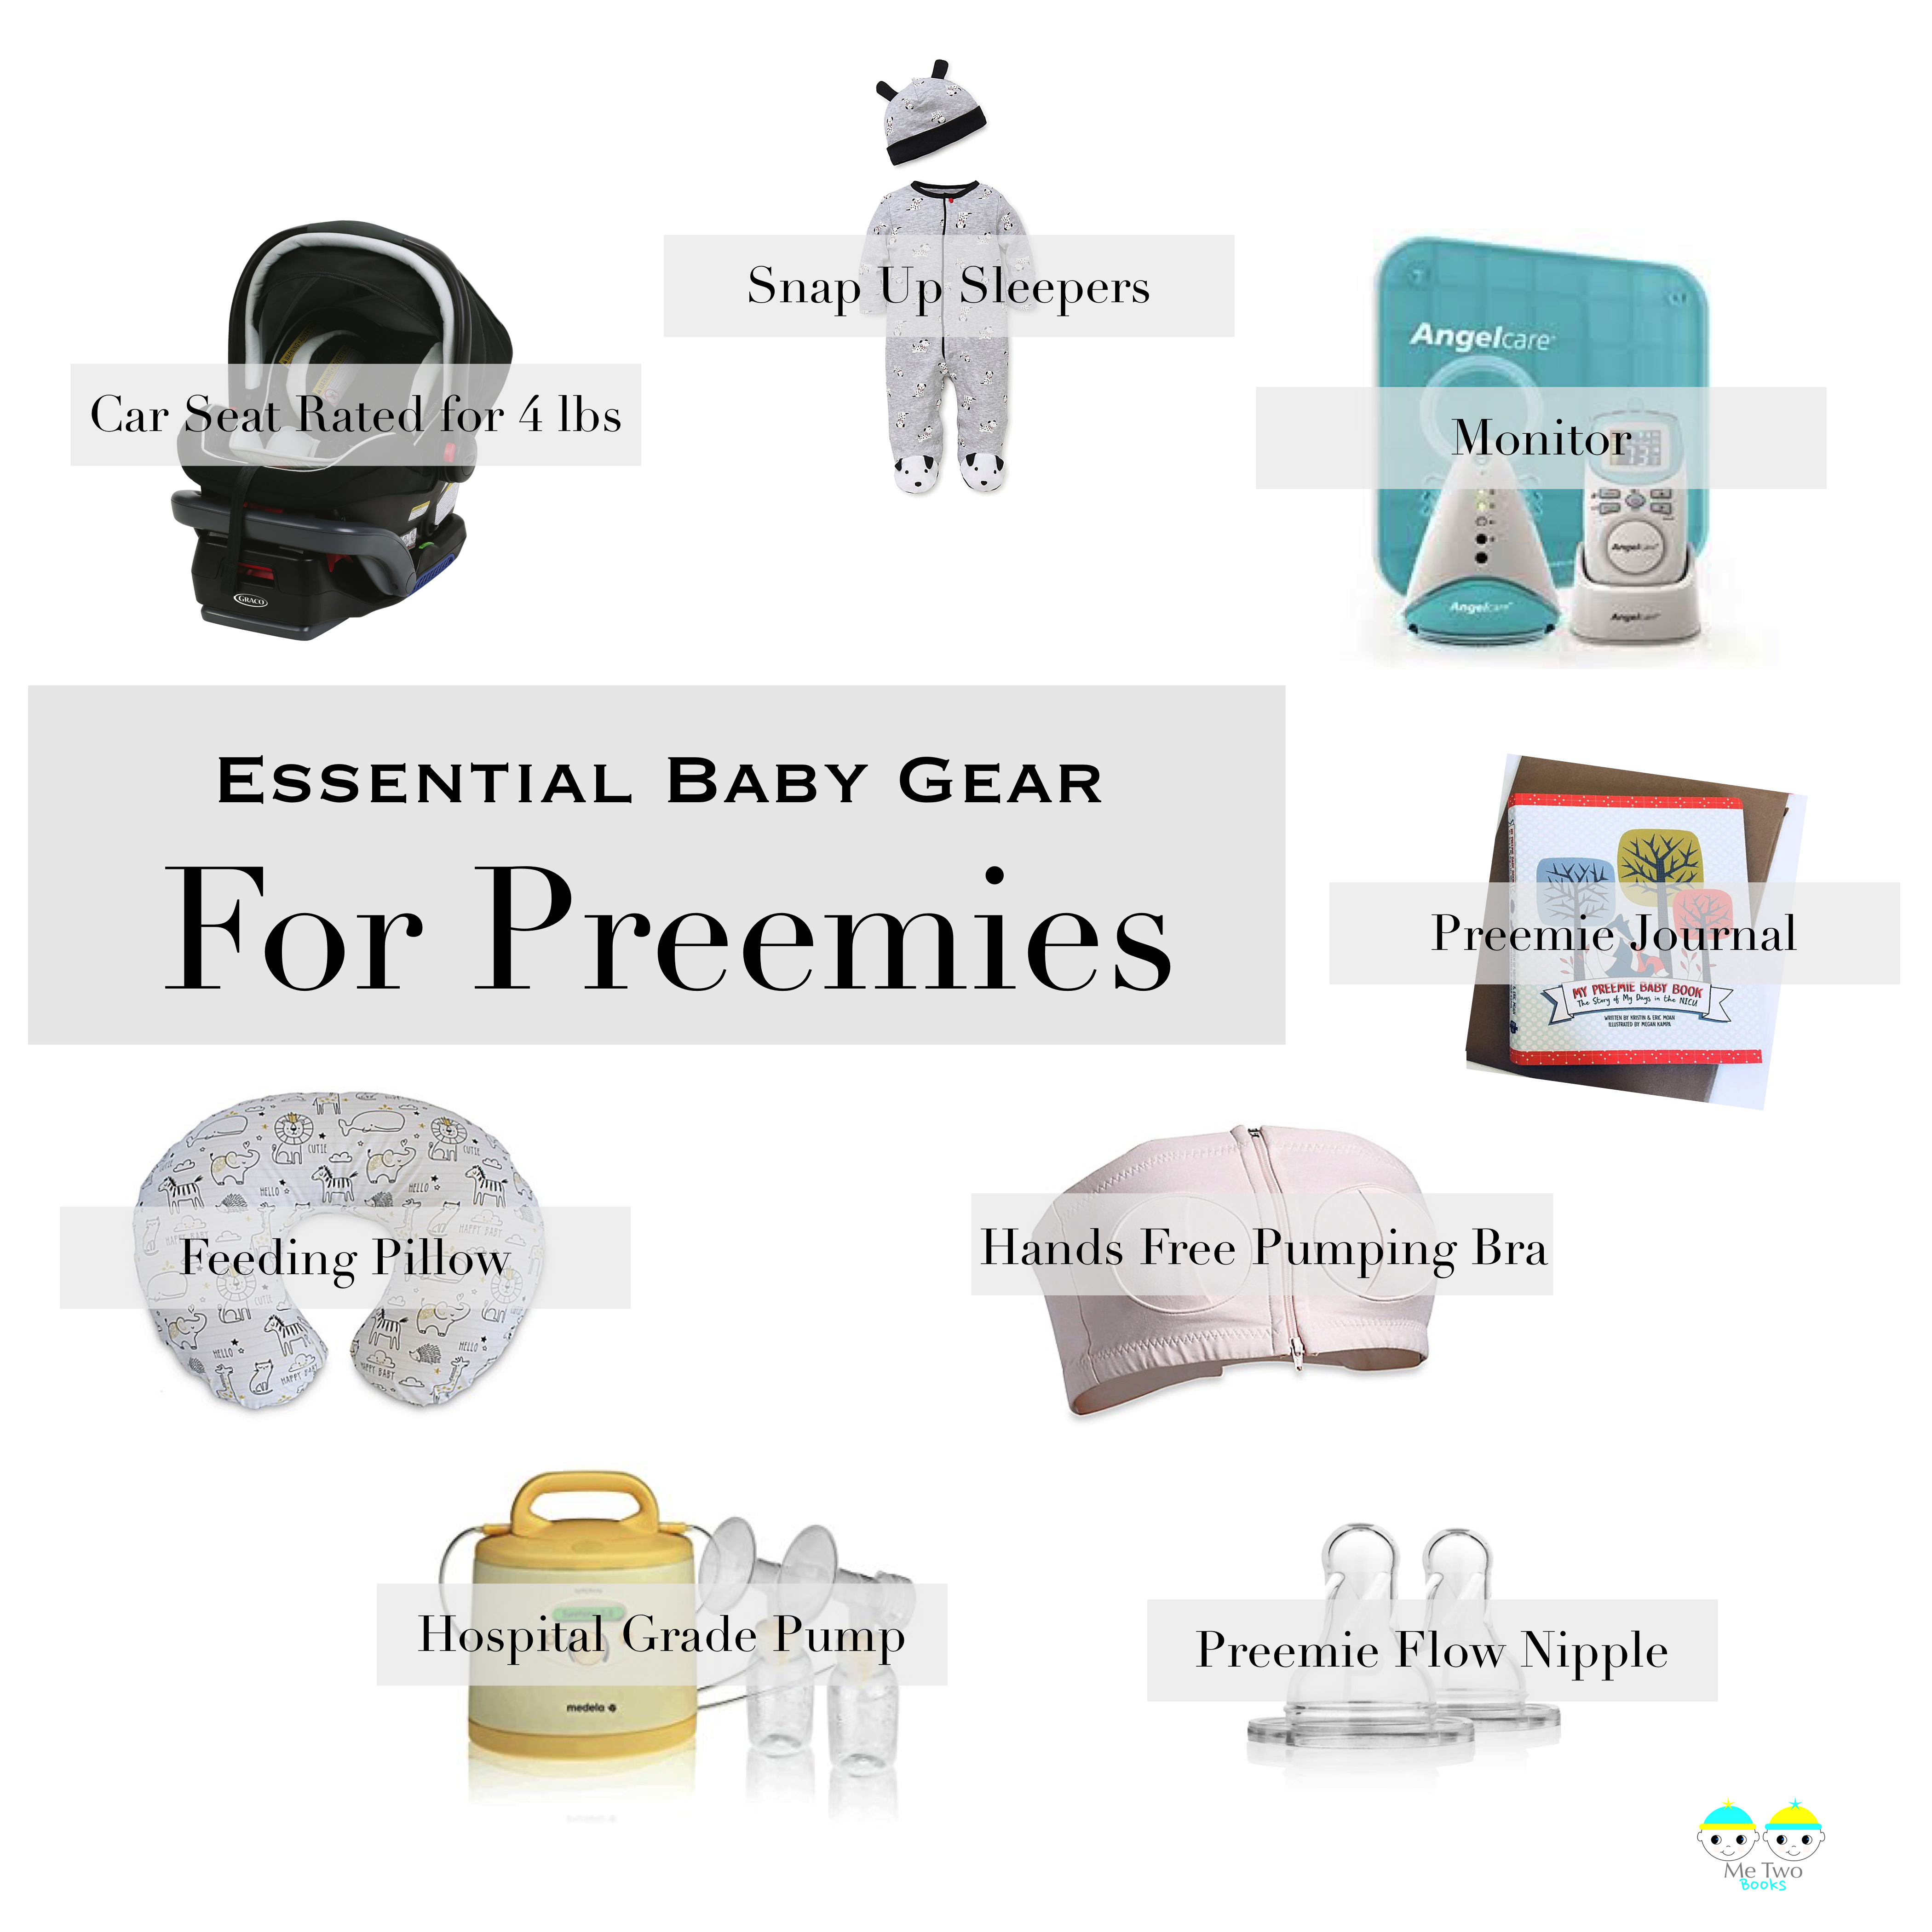 Essential Baby Gear for Preemies - Hand 